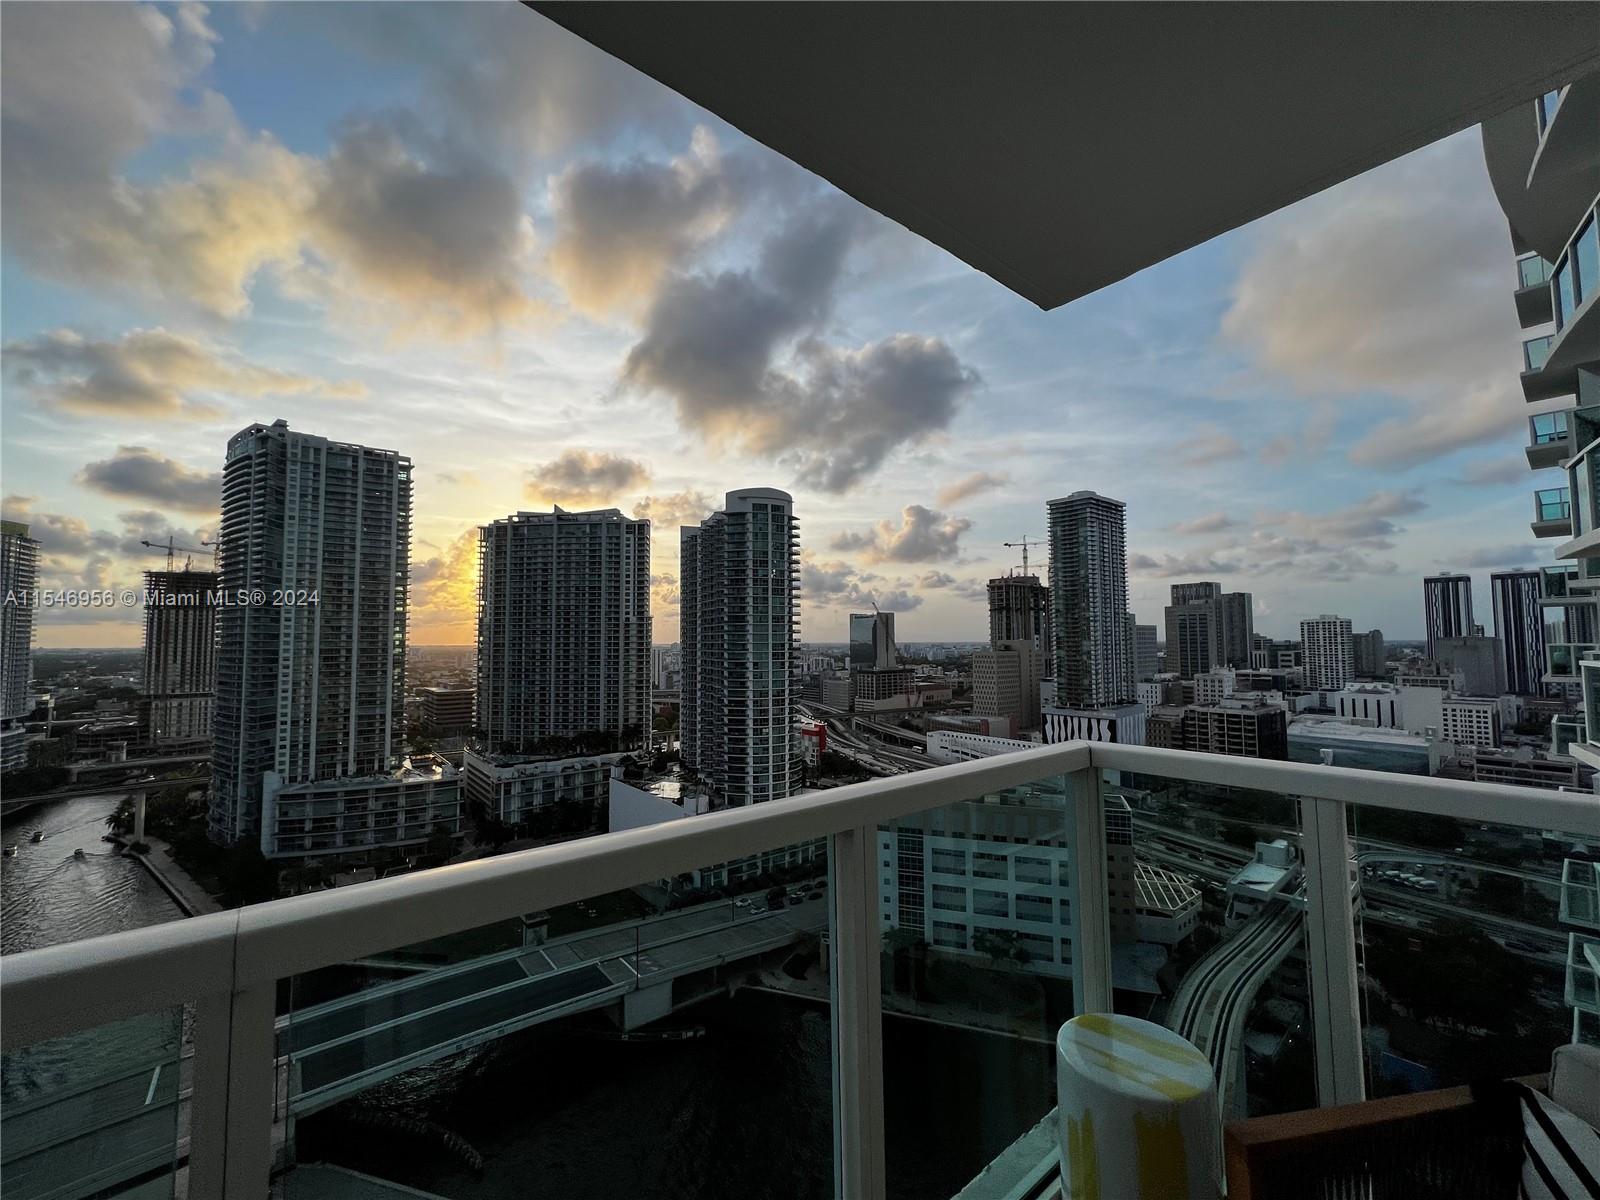 A chic 2BD/2BA Luxury Apartment with Breathtaking River & Sunset Views in Prime Brickell Location.
Welcome to your dream rental in the heart of Miami's most desirable neighborhood, Brickell! This stunning 2-bedroom, 2-bathroom apartment is just steps away from the bustling Brickell City Centre, world-class restaurants, and vibrant nightlife, offering the ultimate Miami living experience. Impeccably designed with high-end finishes and tasteful décor, this luxury apartment boasts spectacular views of the Miami River and the city's most mesmerizing sunsets. Enjoy unparalleled comfort and style in this spacious and elegantly furnished retreat, perfect for relaxation and entertainment. An open concept living and dining area with stylish furnishings, a large Smart TV.